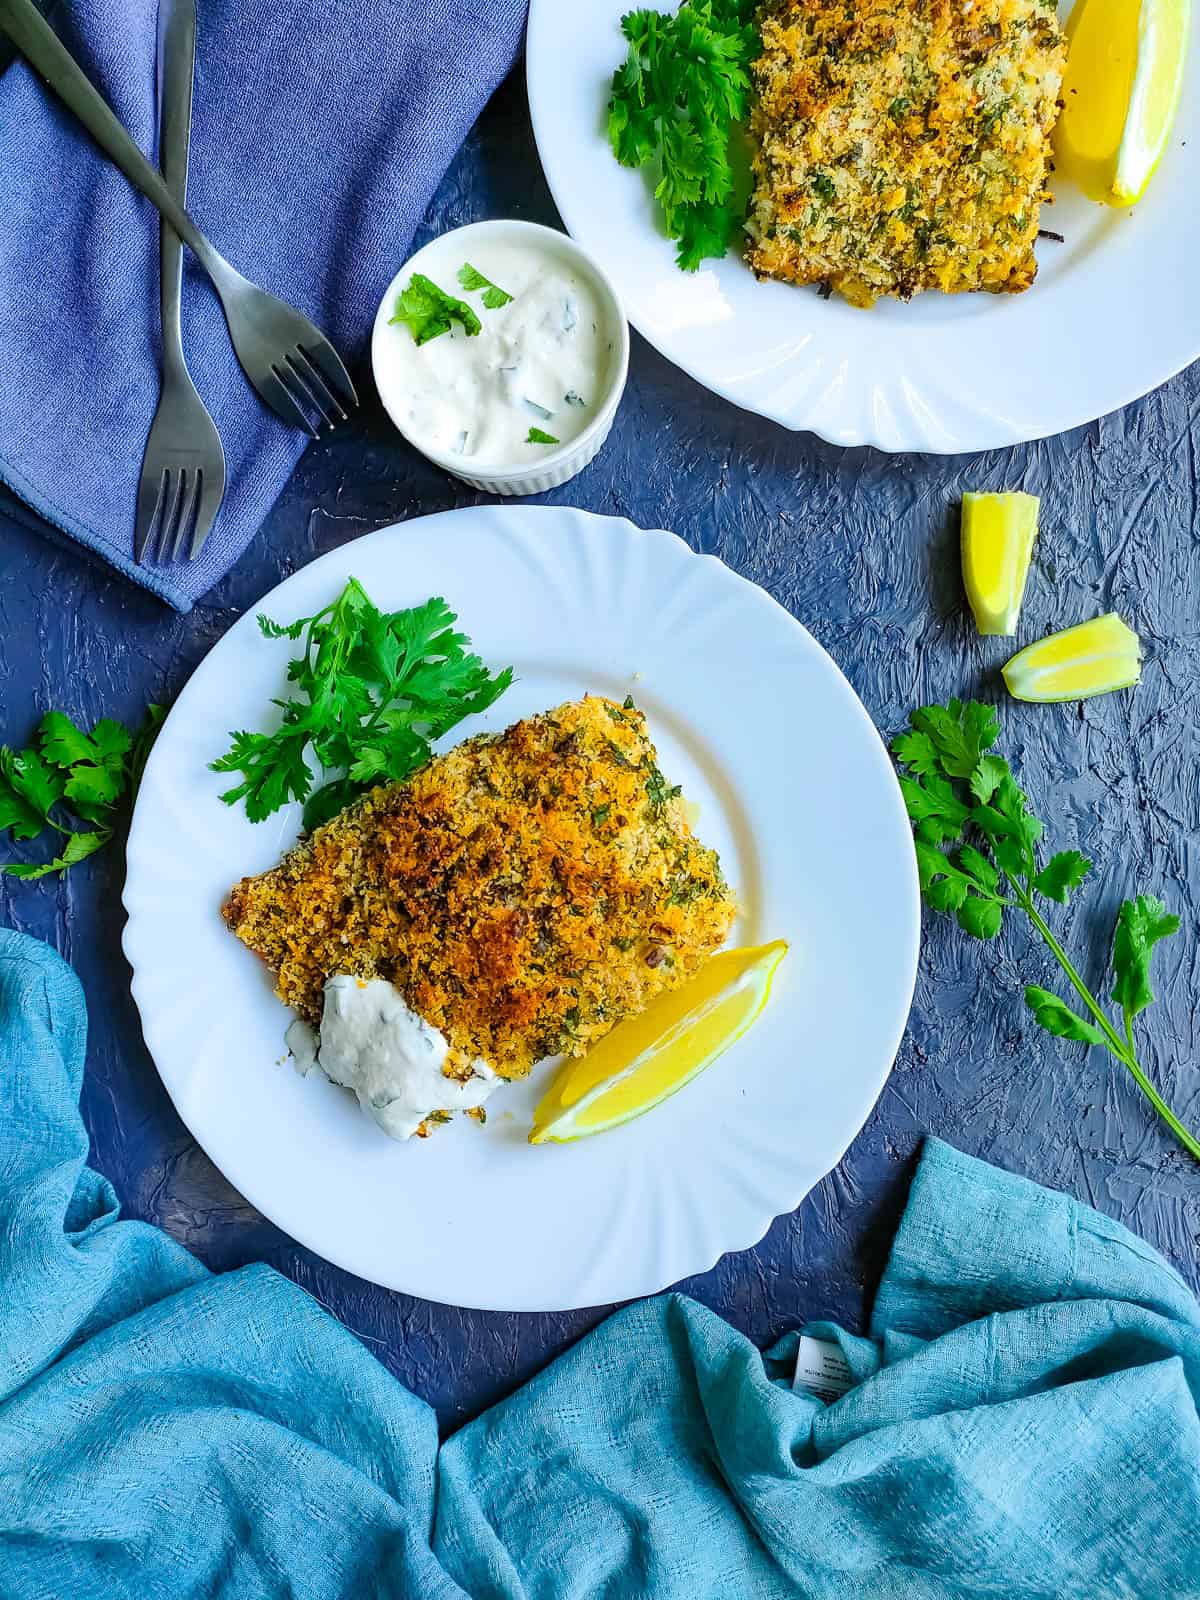 Panko baked cod served with yogurt sauce and garnished with parsley and lemon slices in 2 white plates.